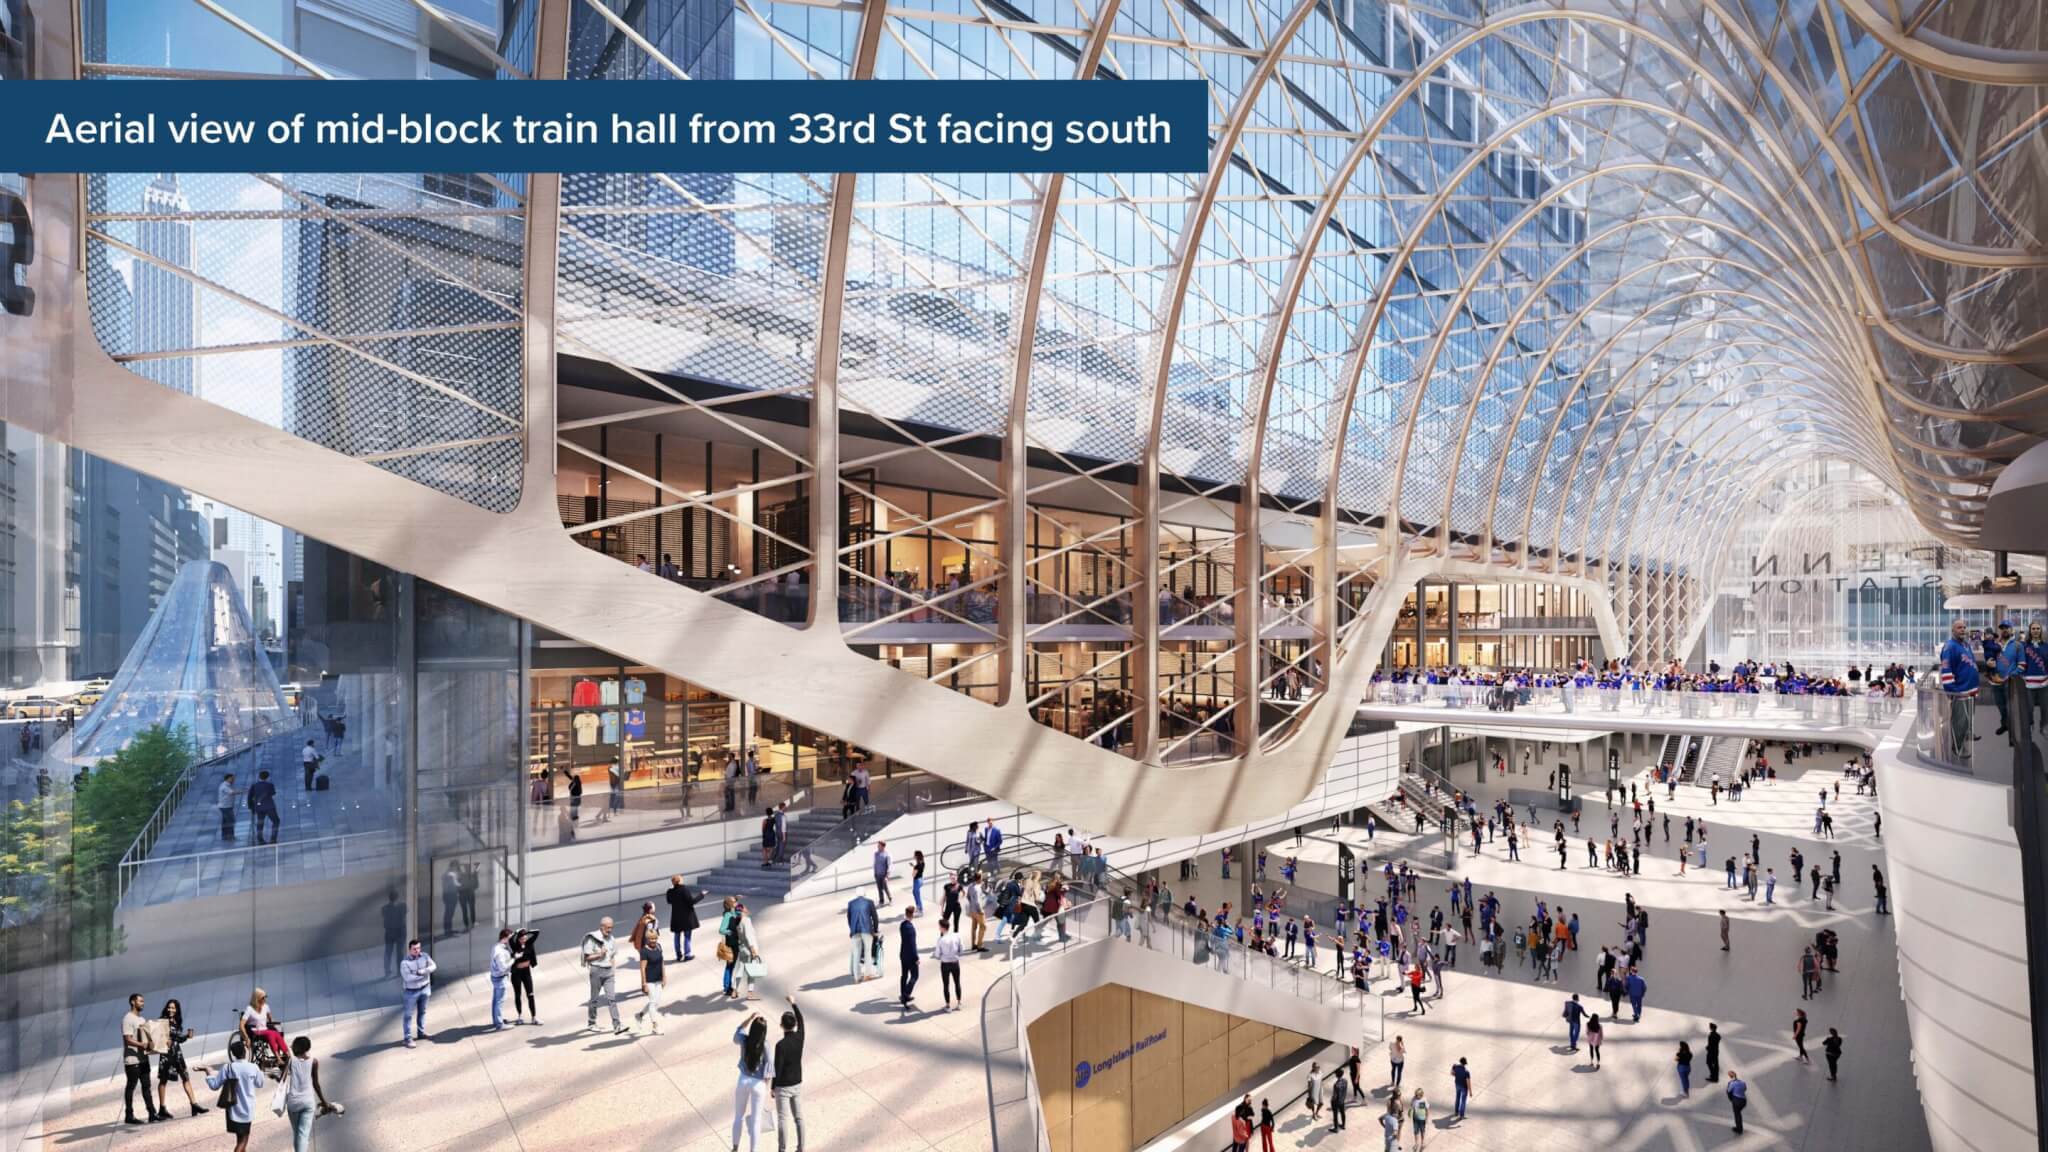 rendering of a train station interior